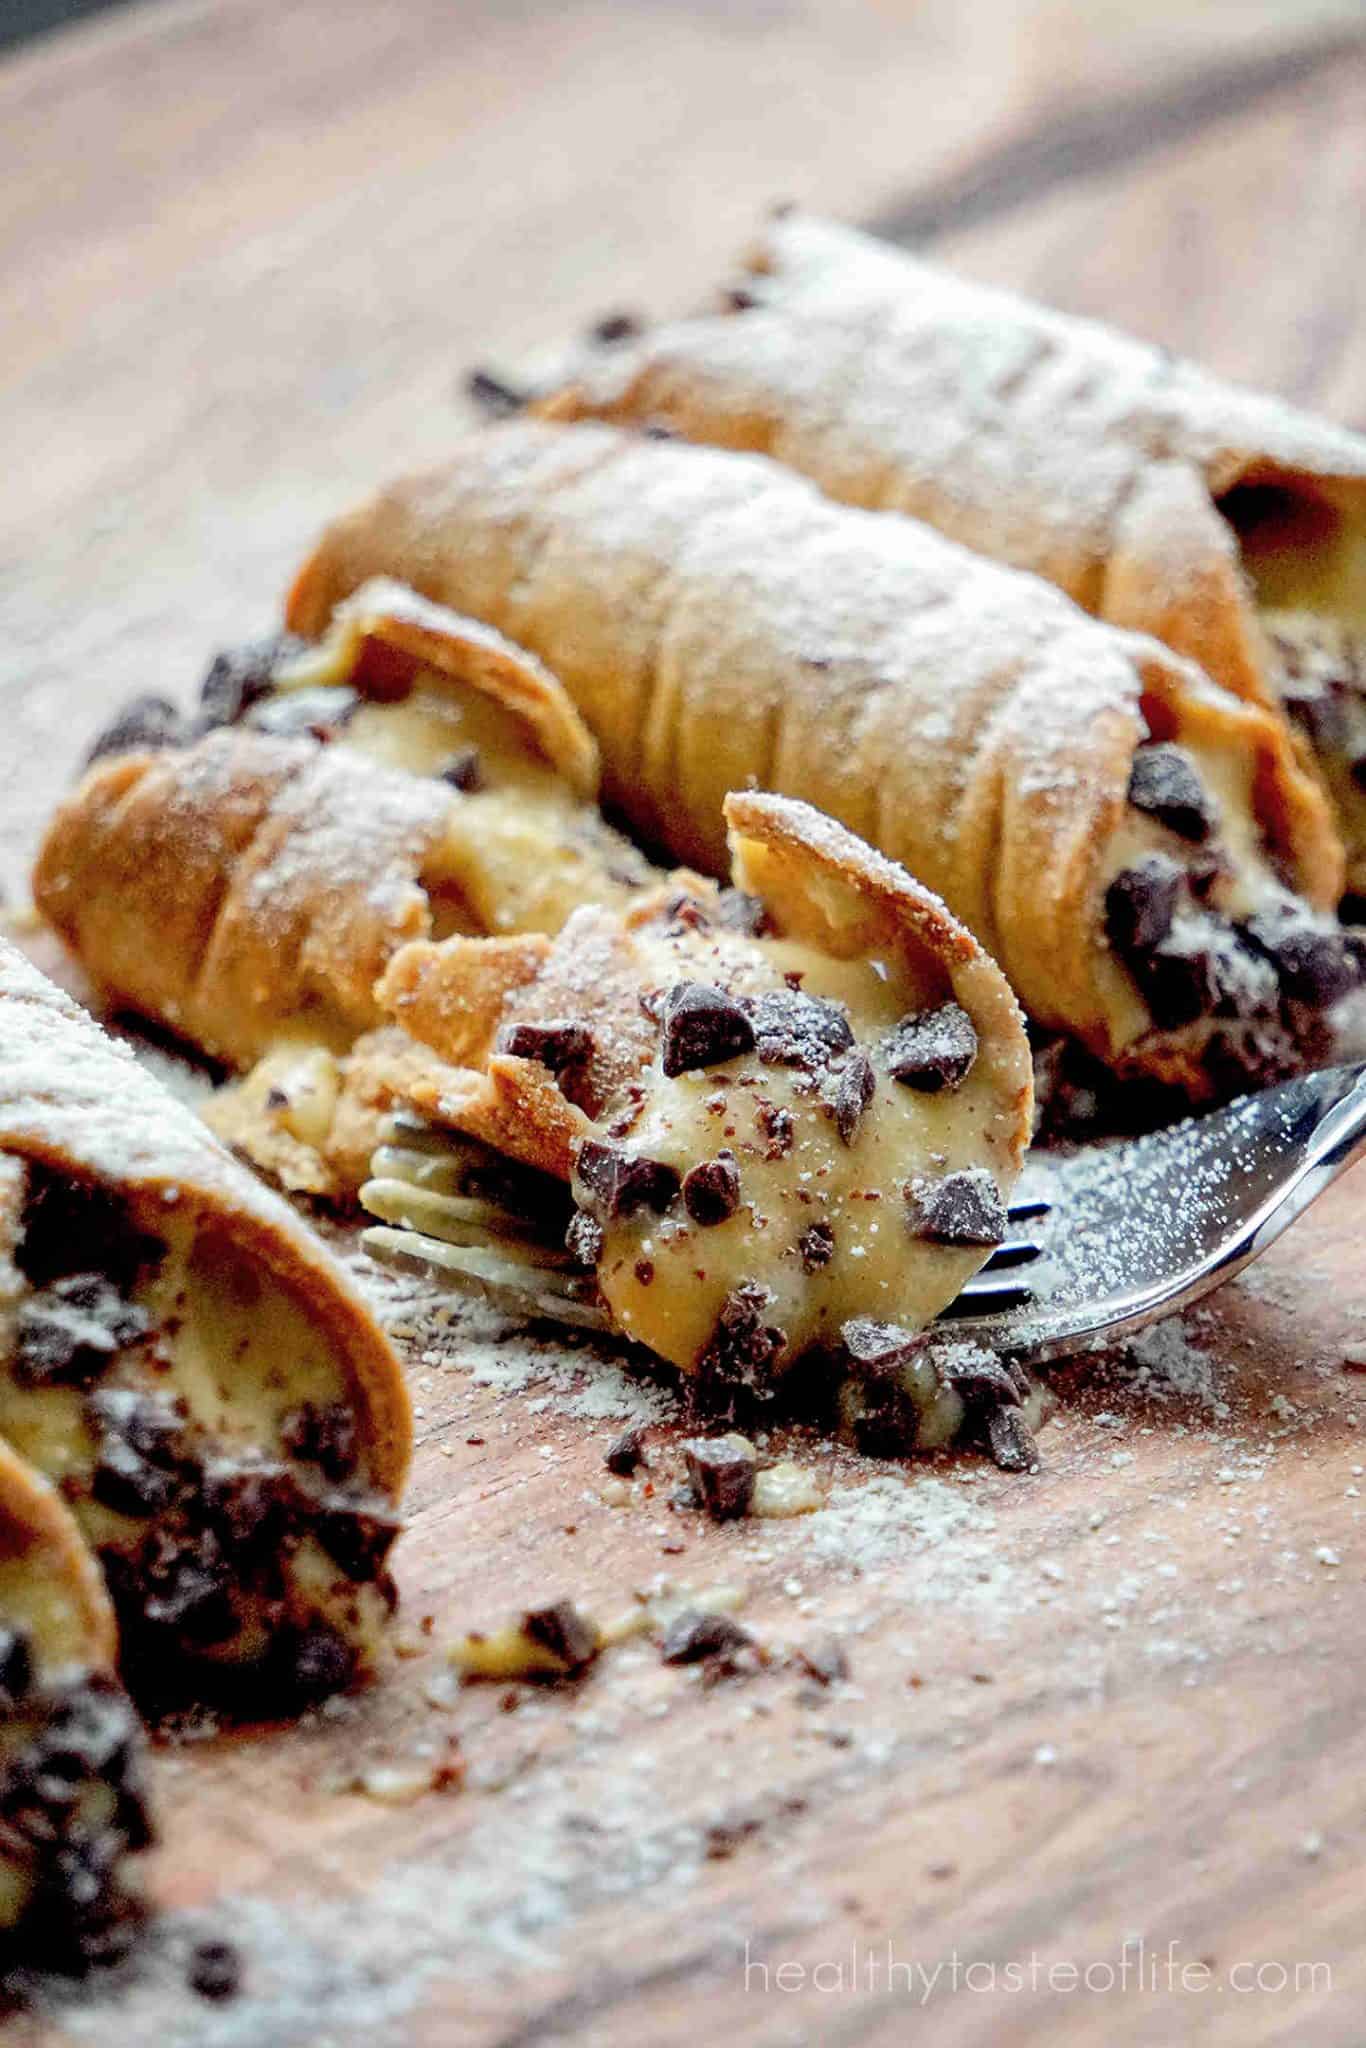 Gluten Free Cannoli Recipe + Dairy Free Filling | Gluten free cannoli shells baked in the oven and filled with a dairy free custard cream.